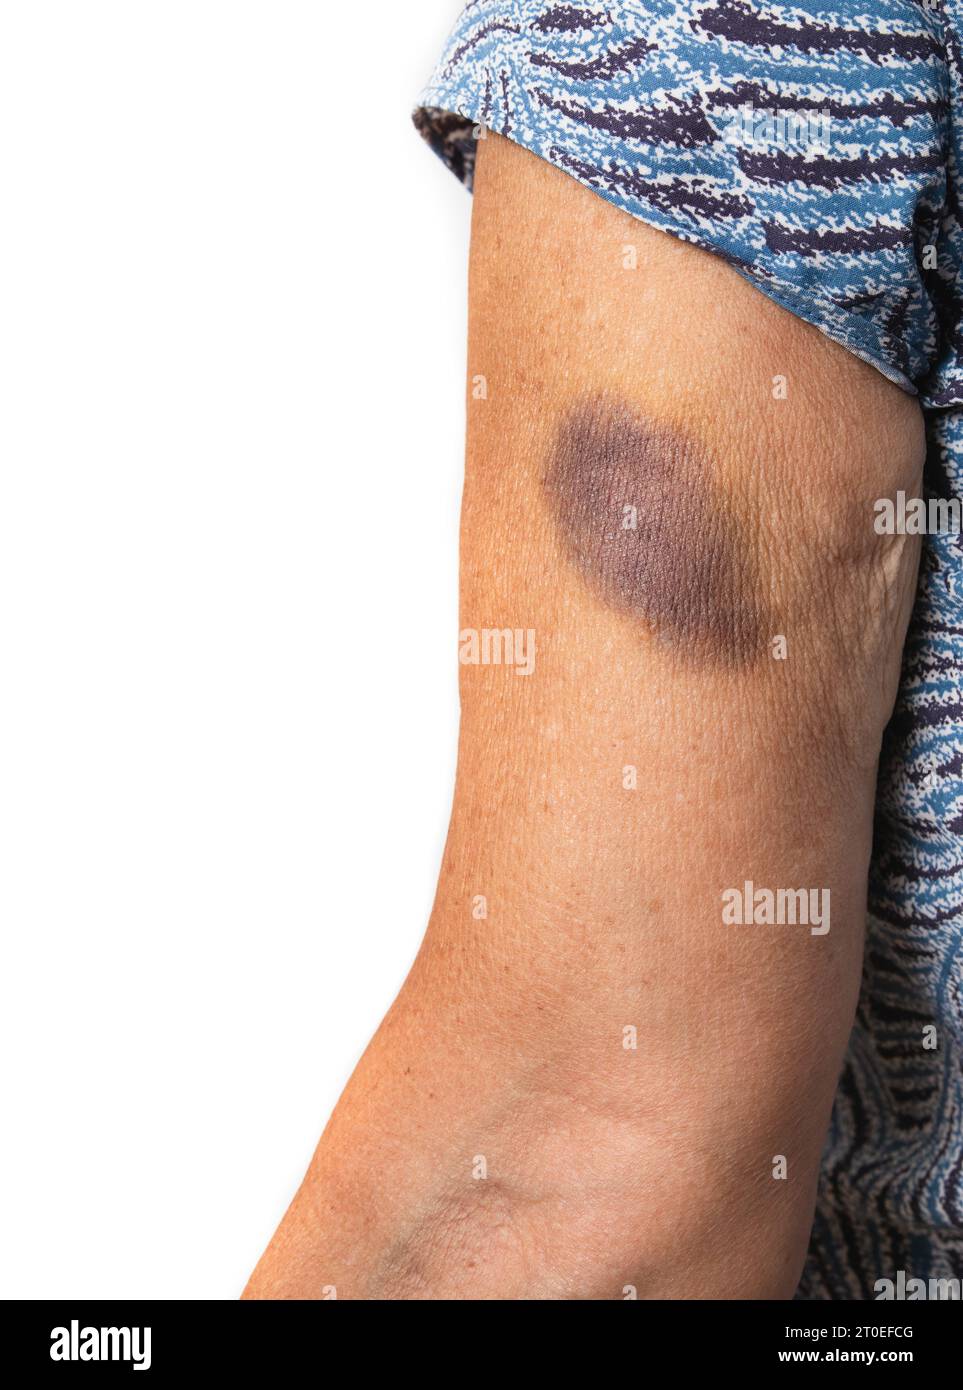 Senior arm with bruise. Woman with large blue and purple mark from falling or accident. Or contusions from medical reasons such as blood thinner, vita Stock Photo